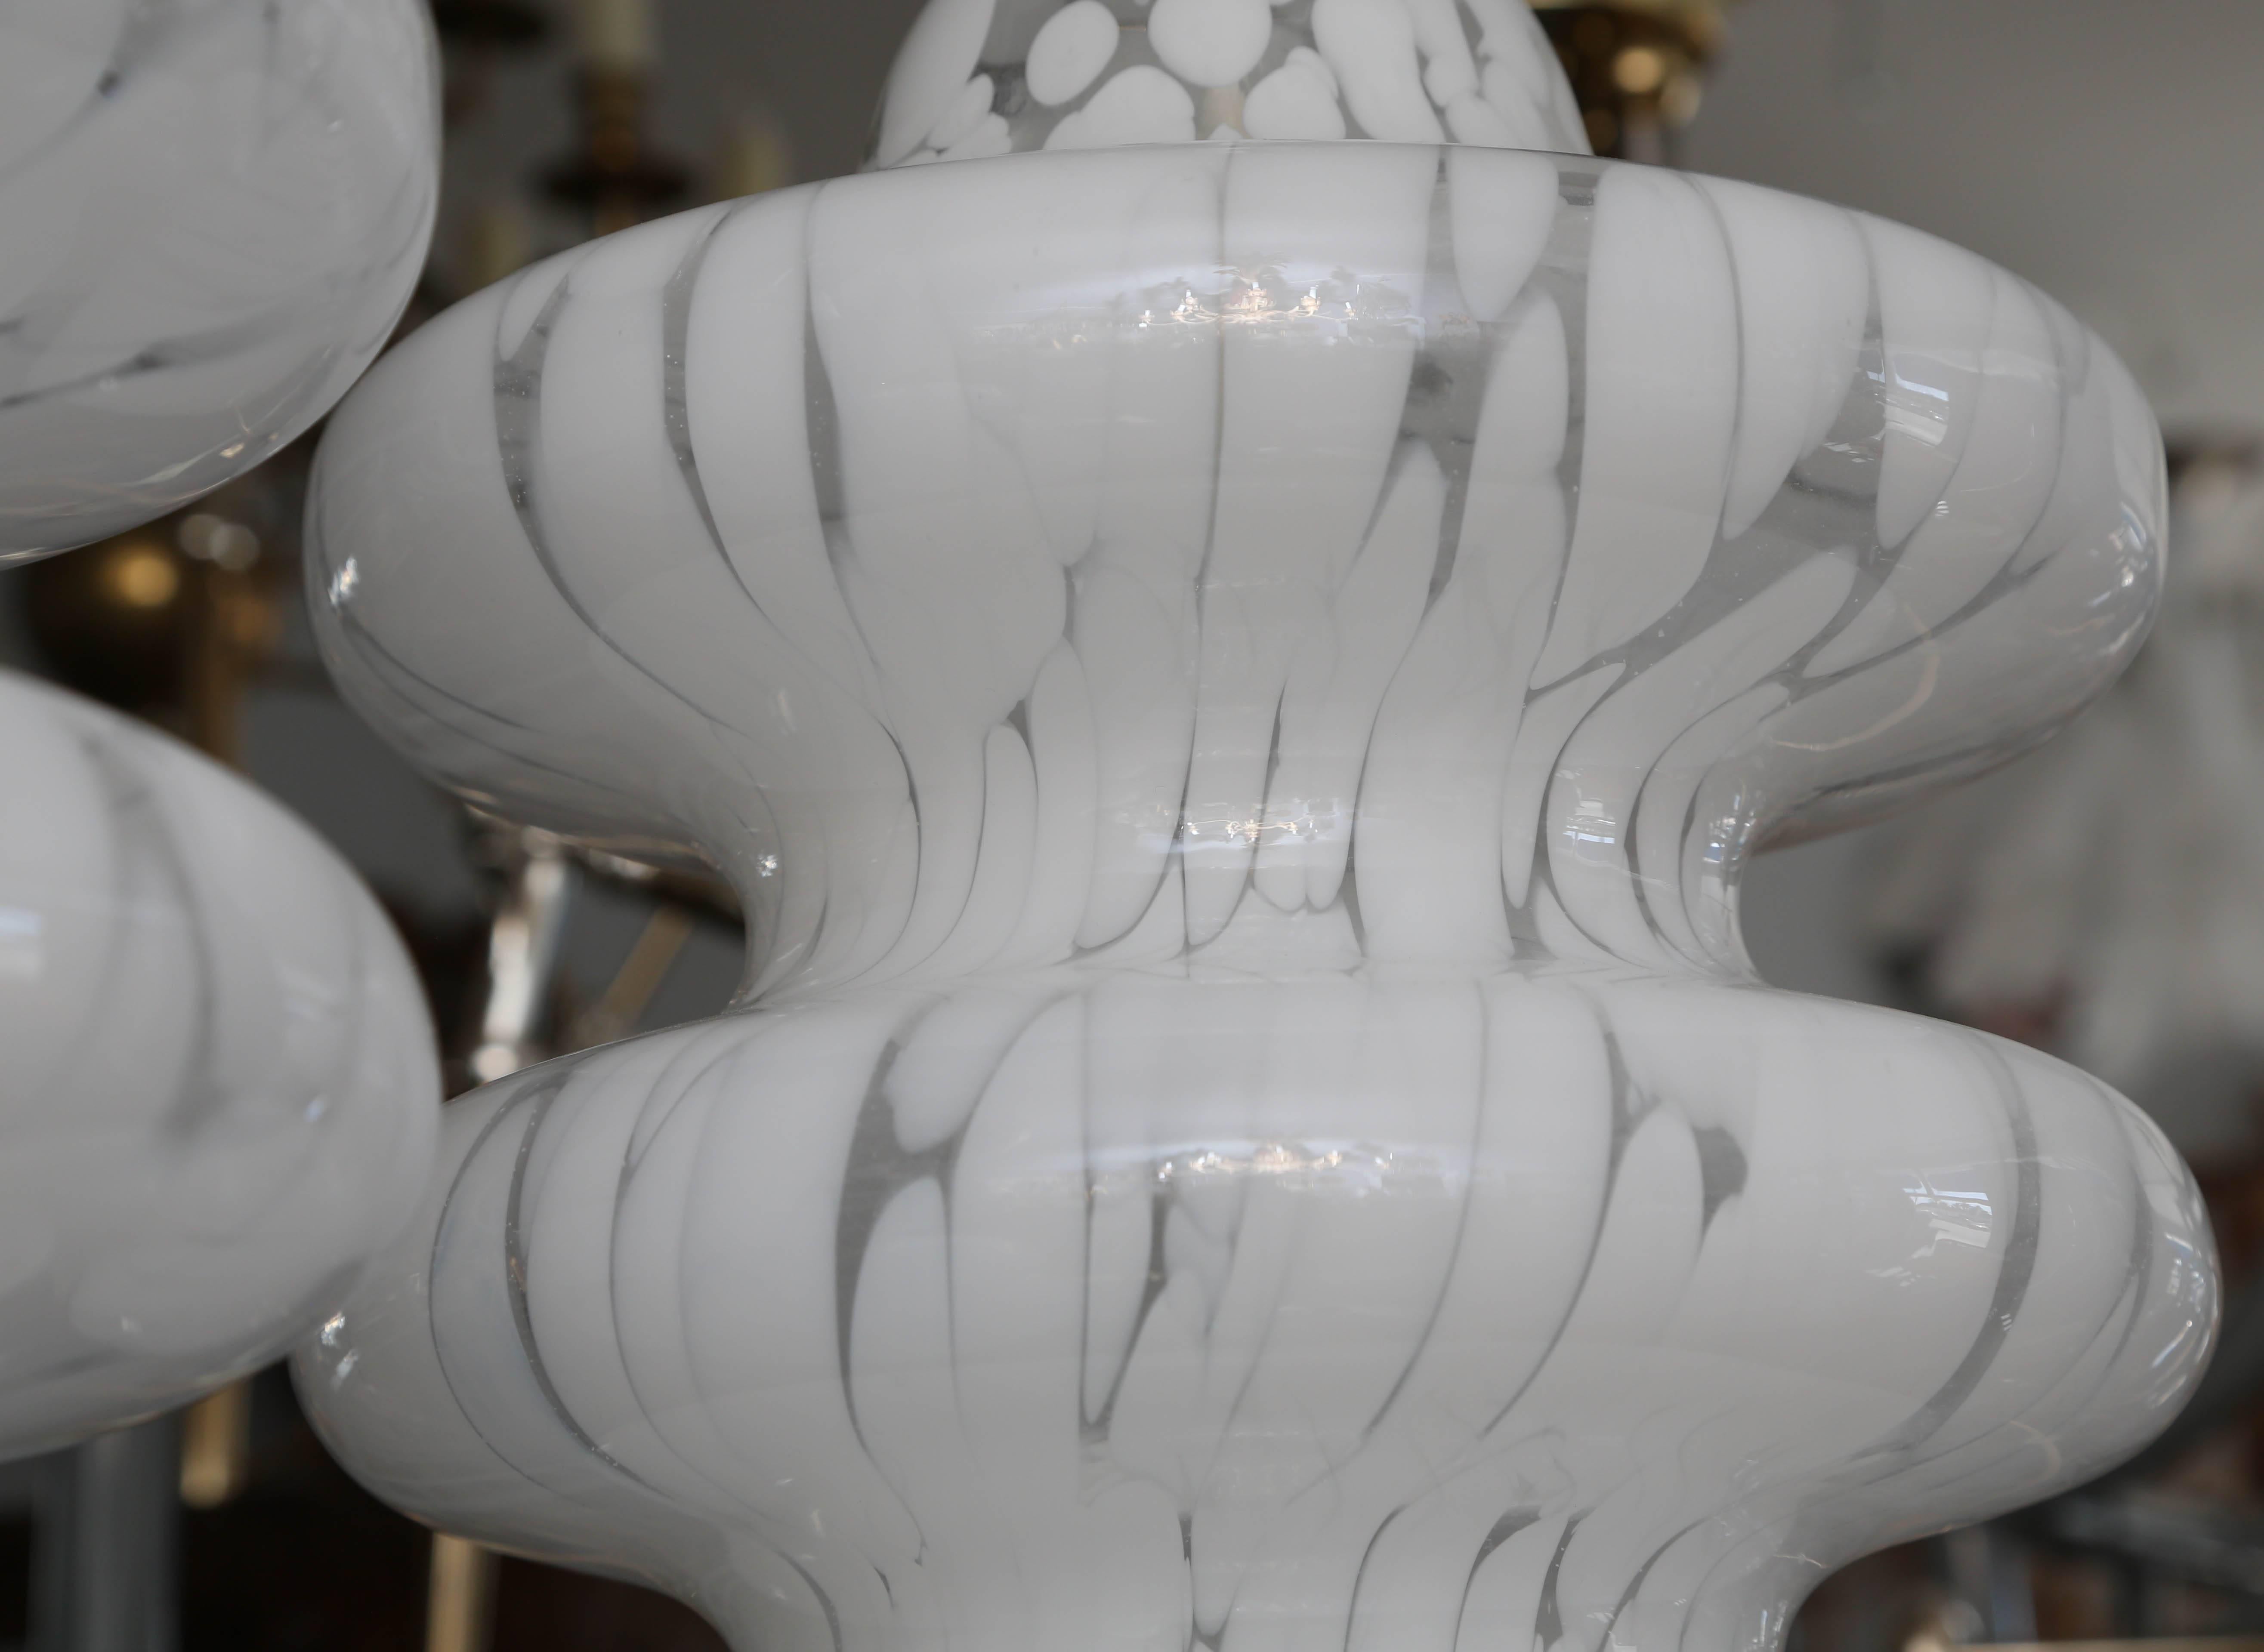 Unusual form. The pair are appointed with chrome bases.
Cloud-like white color and form.